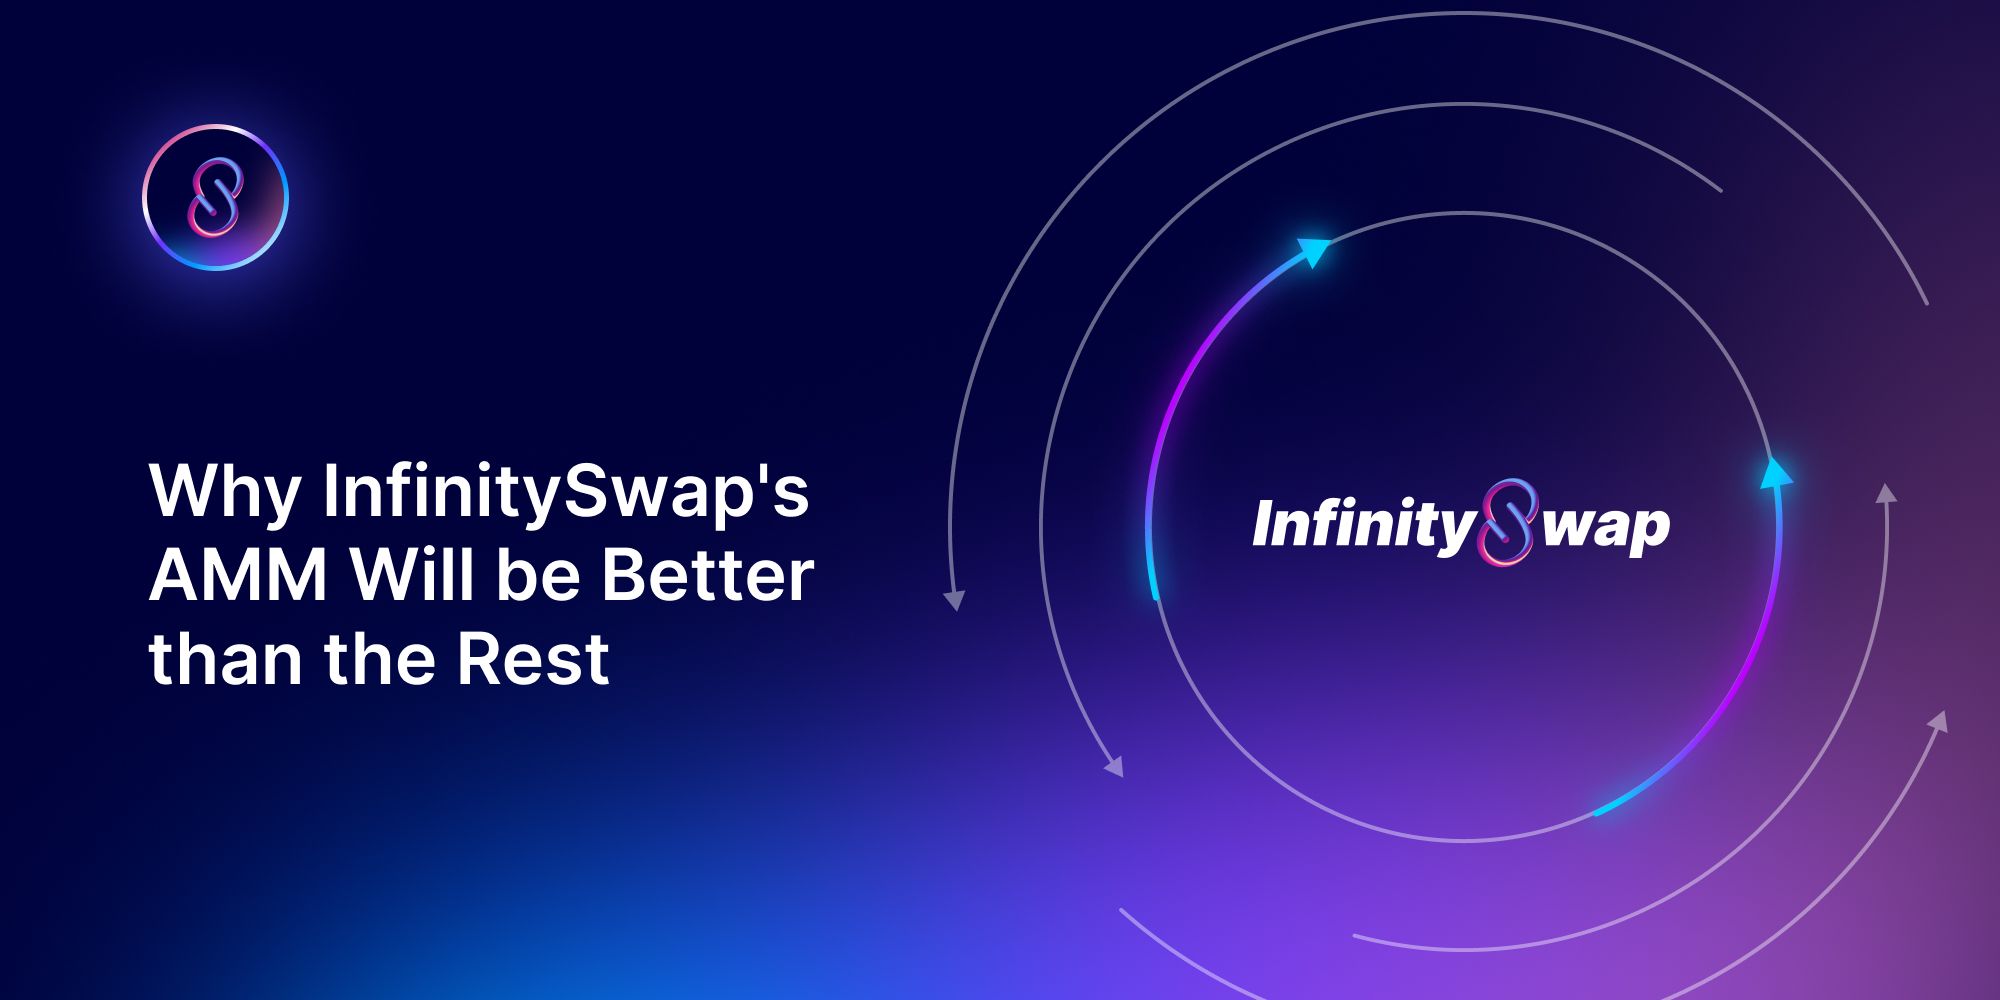 Why InfinitySwap's AMM is Better than the Rest